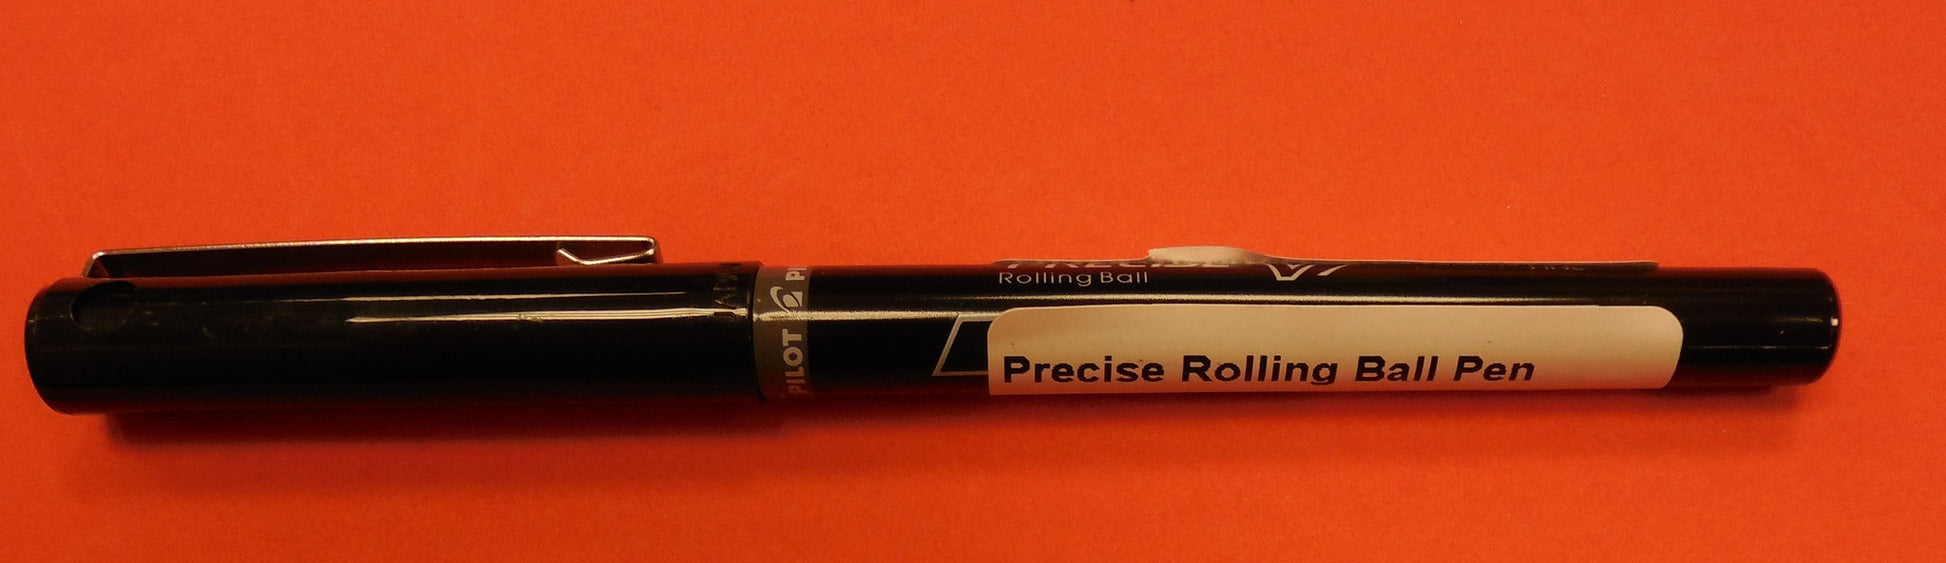 A Precise rolling ball pen. It's black and has a label on it